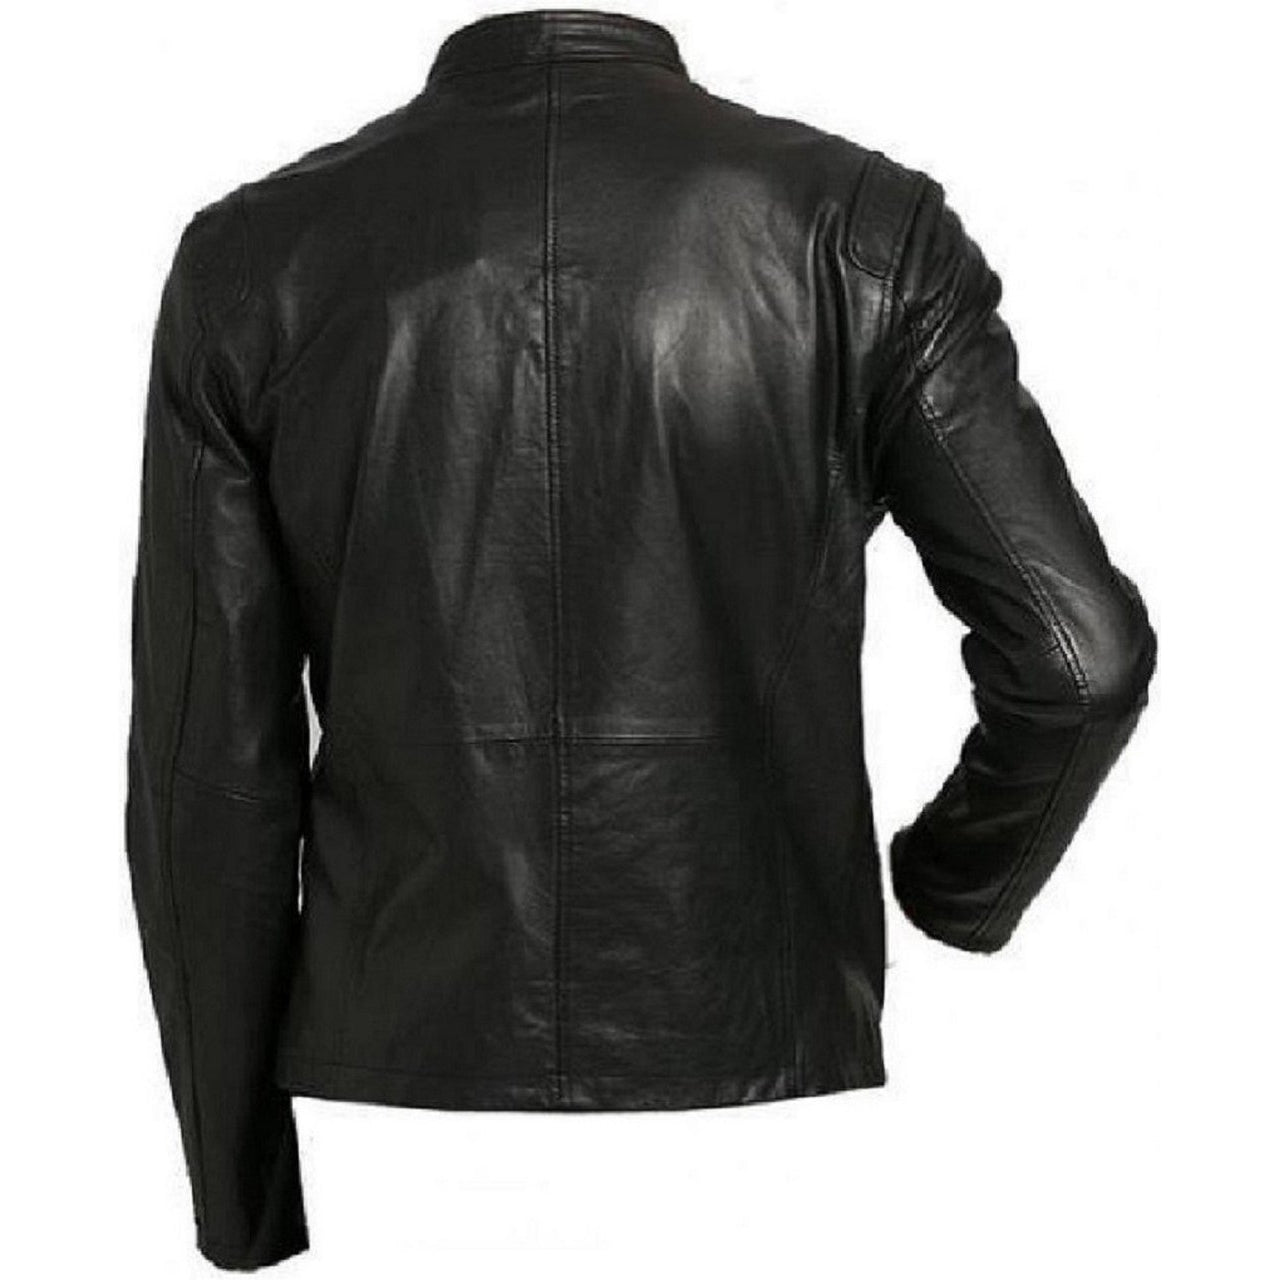 Biker Men Real Lambskin Leather Jacket With Buckle Strap Collar - Leather Jacket